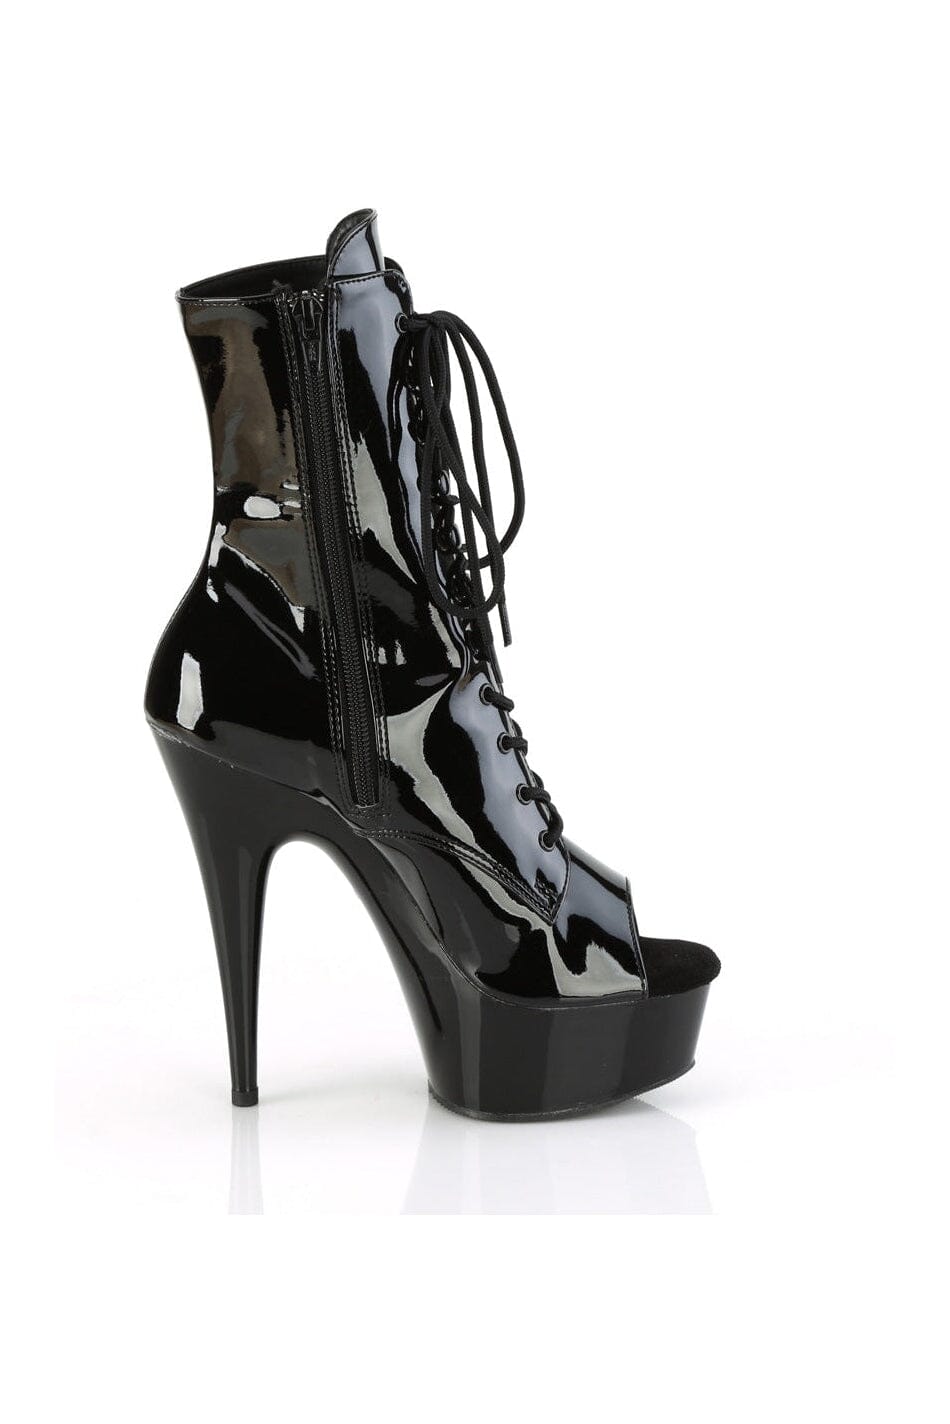 DELIGHT-1021 Black Patent Ankle Boot-Ankle Boots-Pleaser-SEXYSHOES.COM